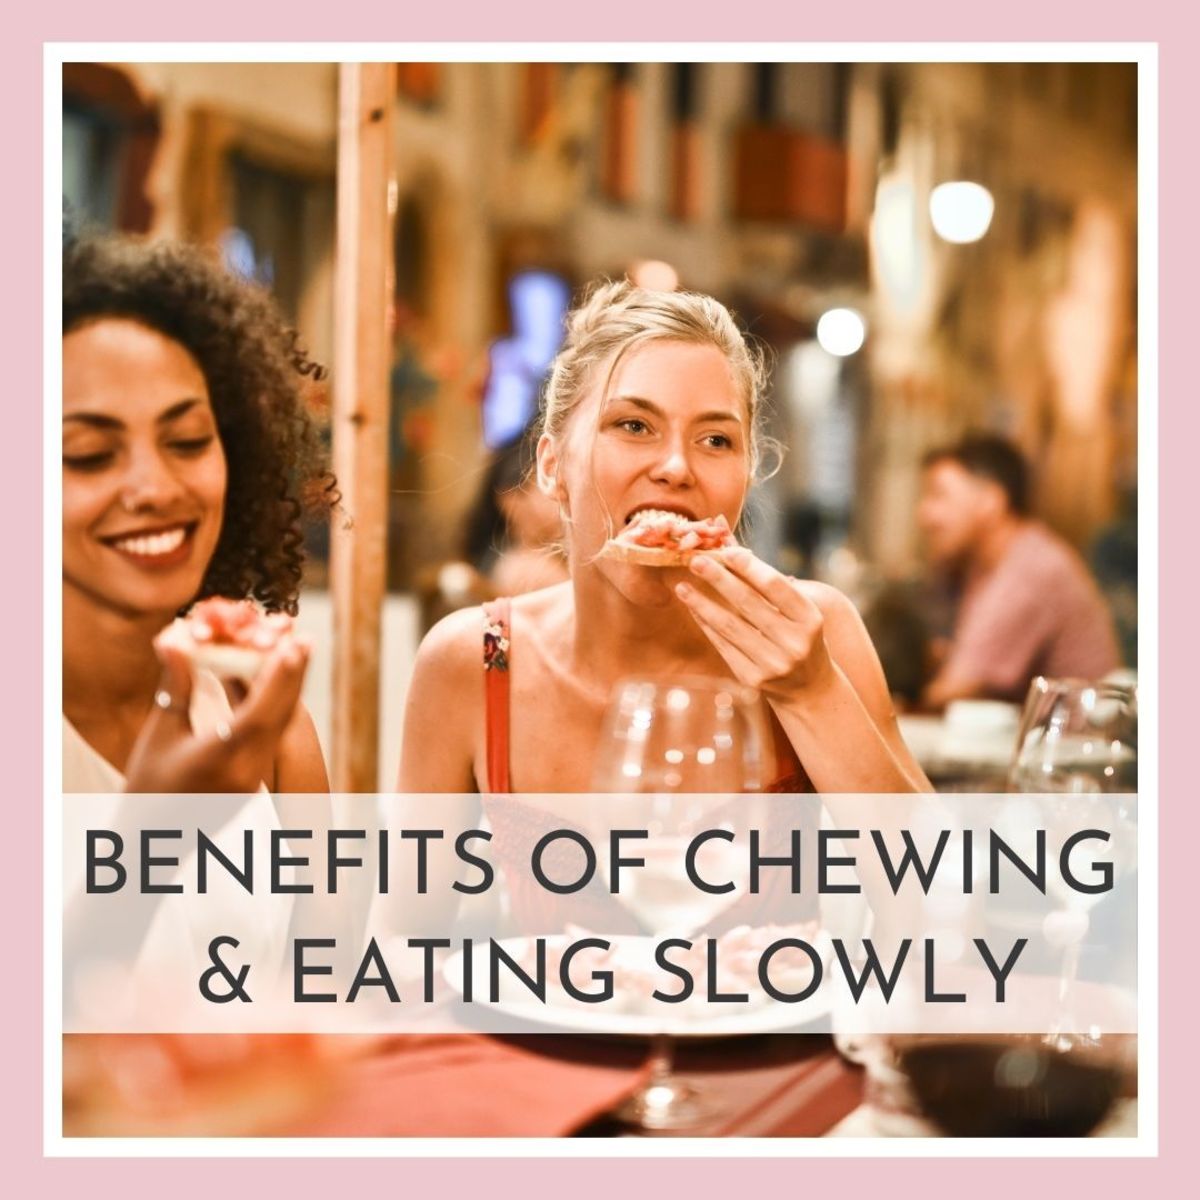 Benefits of Chewing and Eating Your Food Slowly